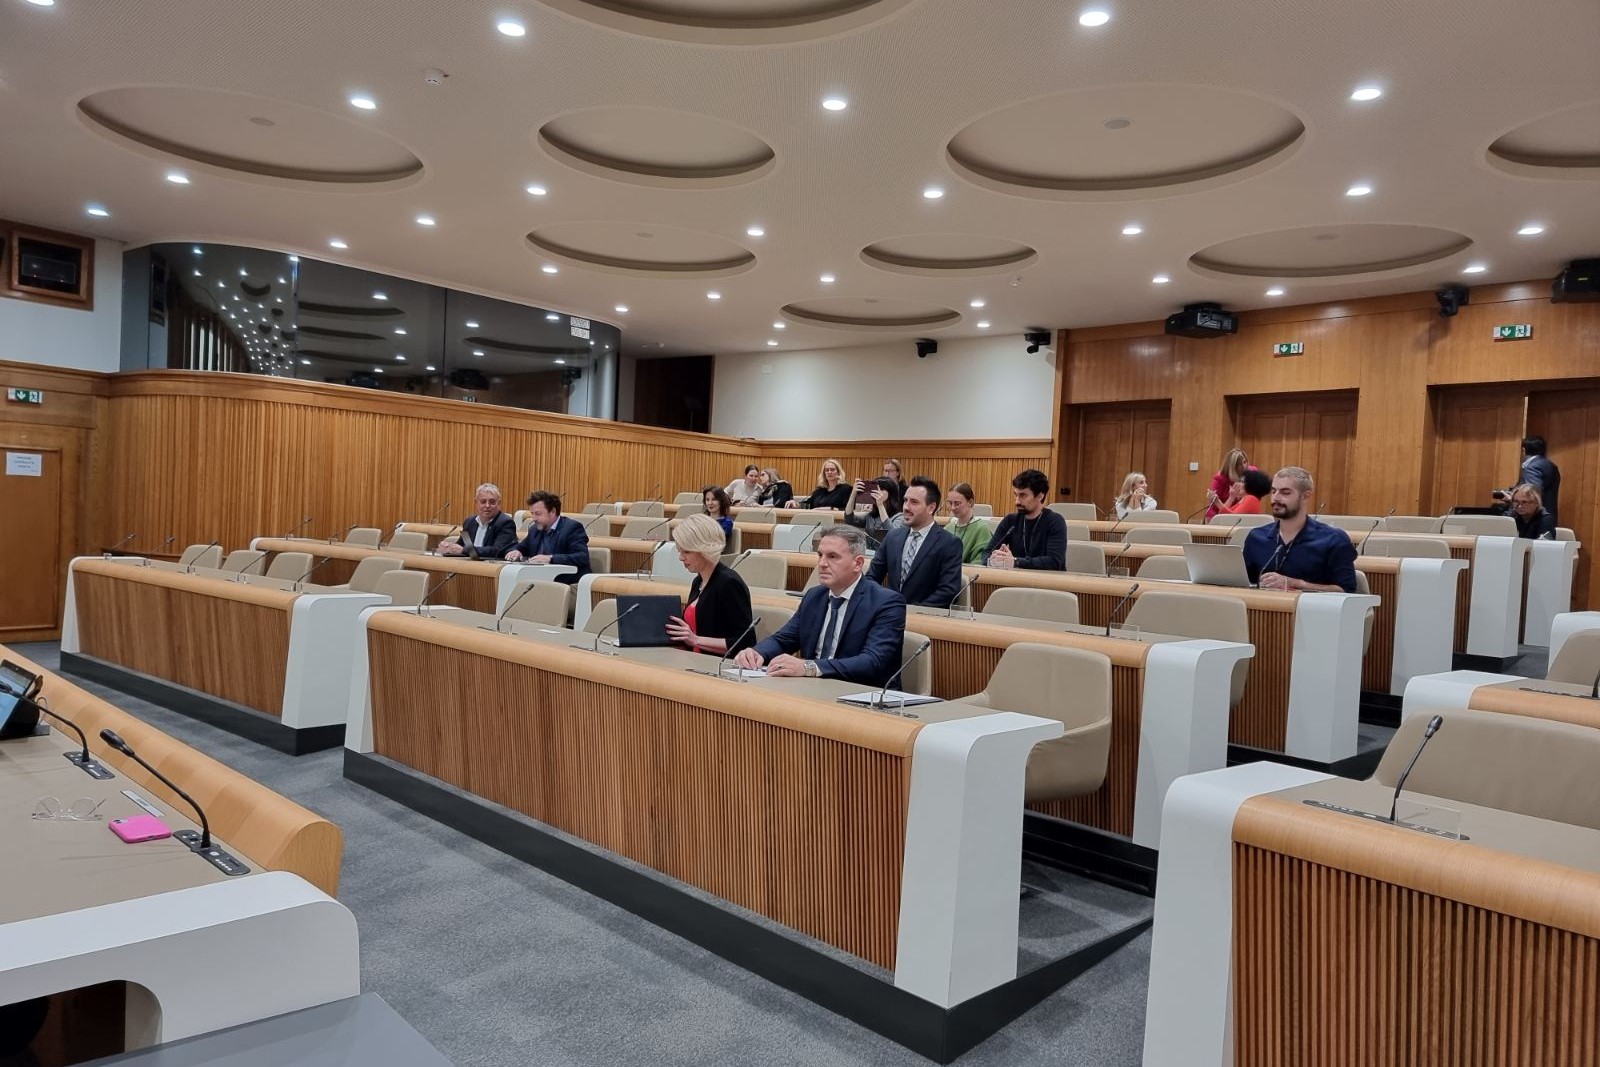 Delegate in the House of Peoples of the Parliamentary Assembly of Bosnia and Herzegovina (PABiH), Džemal Smajić, participated in a symposium on the transparency of state parliaments in Ljubljana